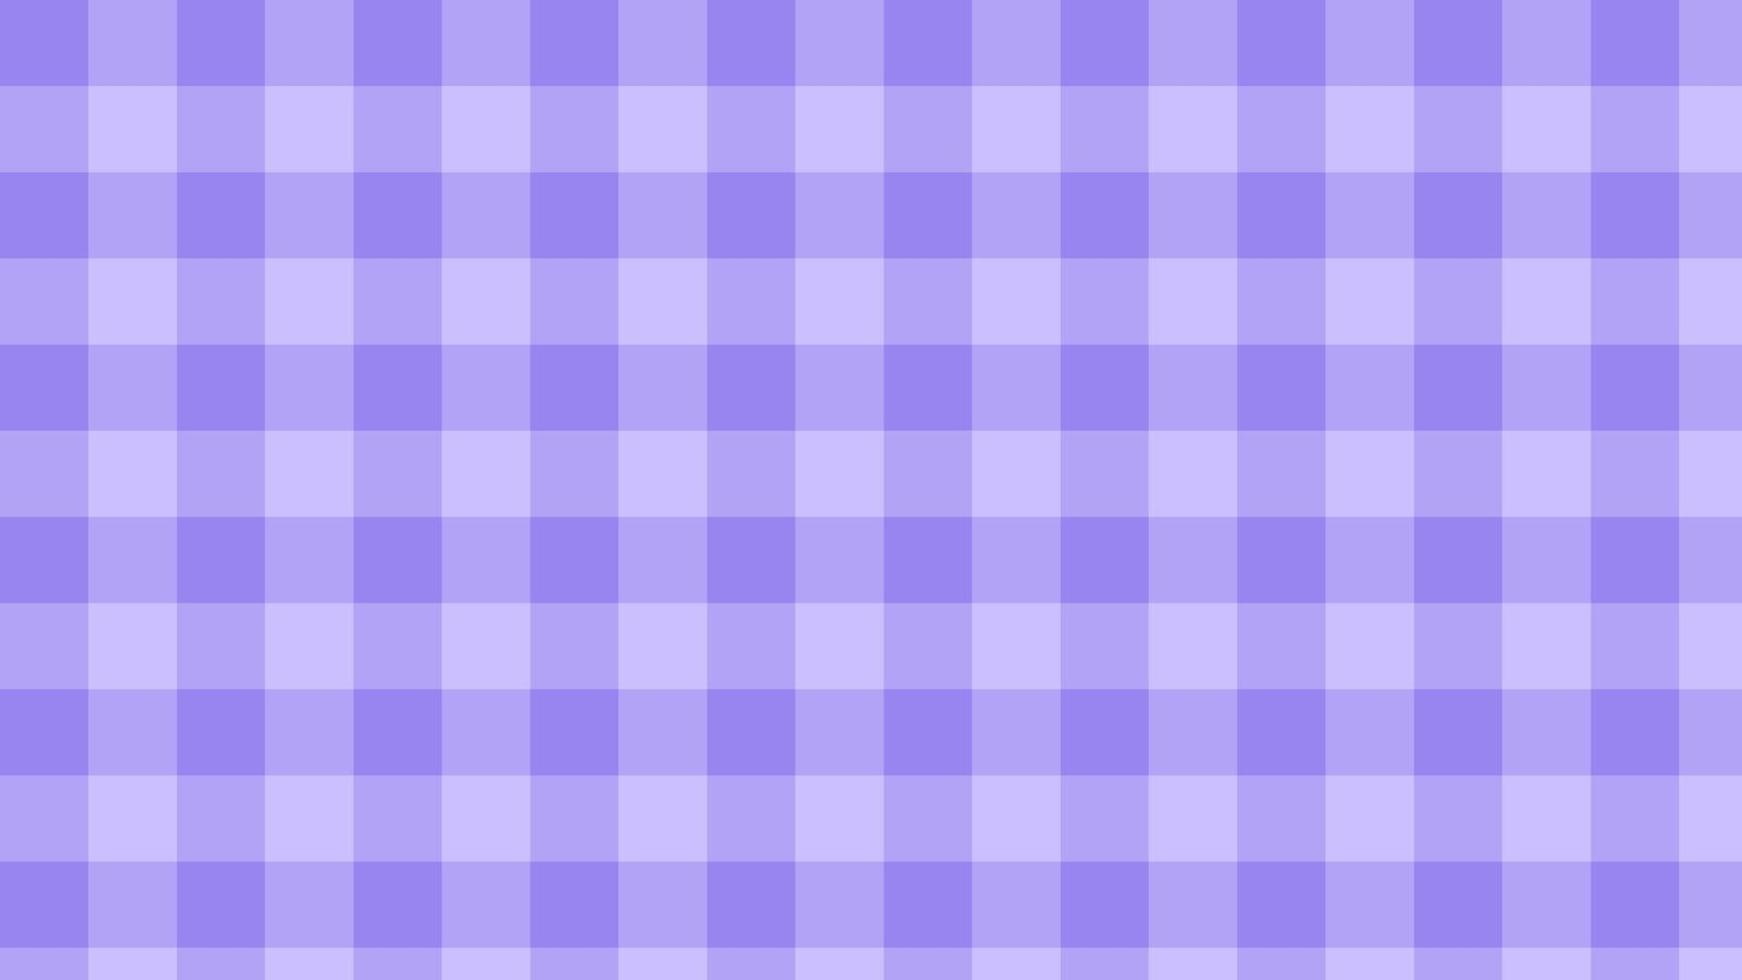 purple big gingham, checkers, plaid, aesthetic violet checkerboard wallpaper illustration, perfect for wallpaper, backdrop, postcard, background for your design vector